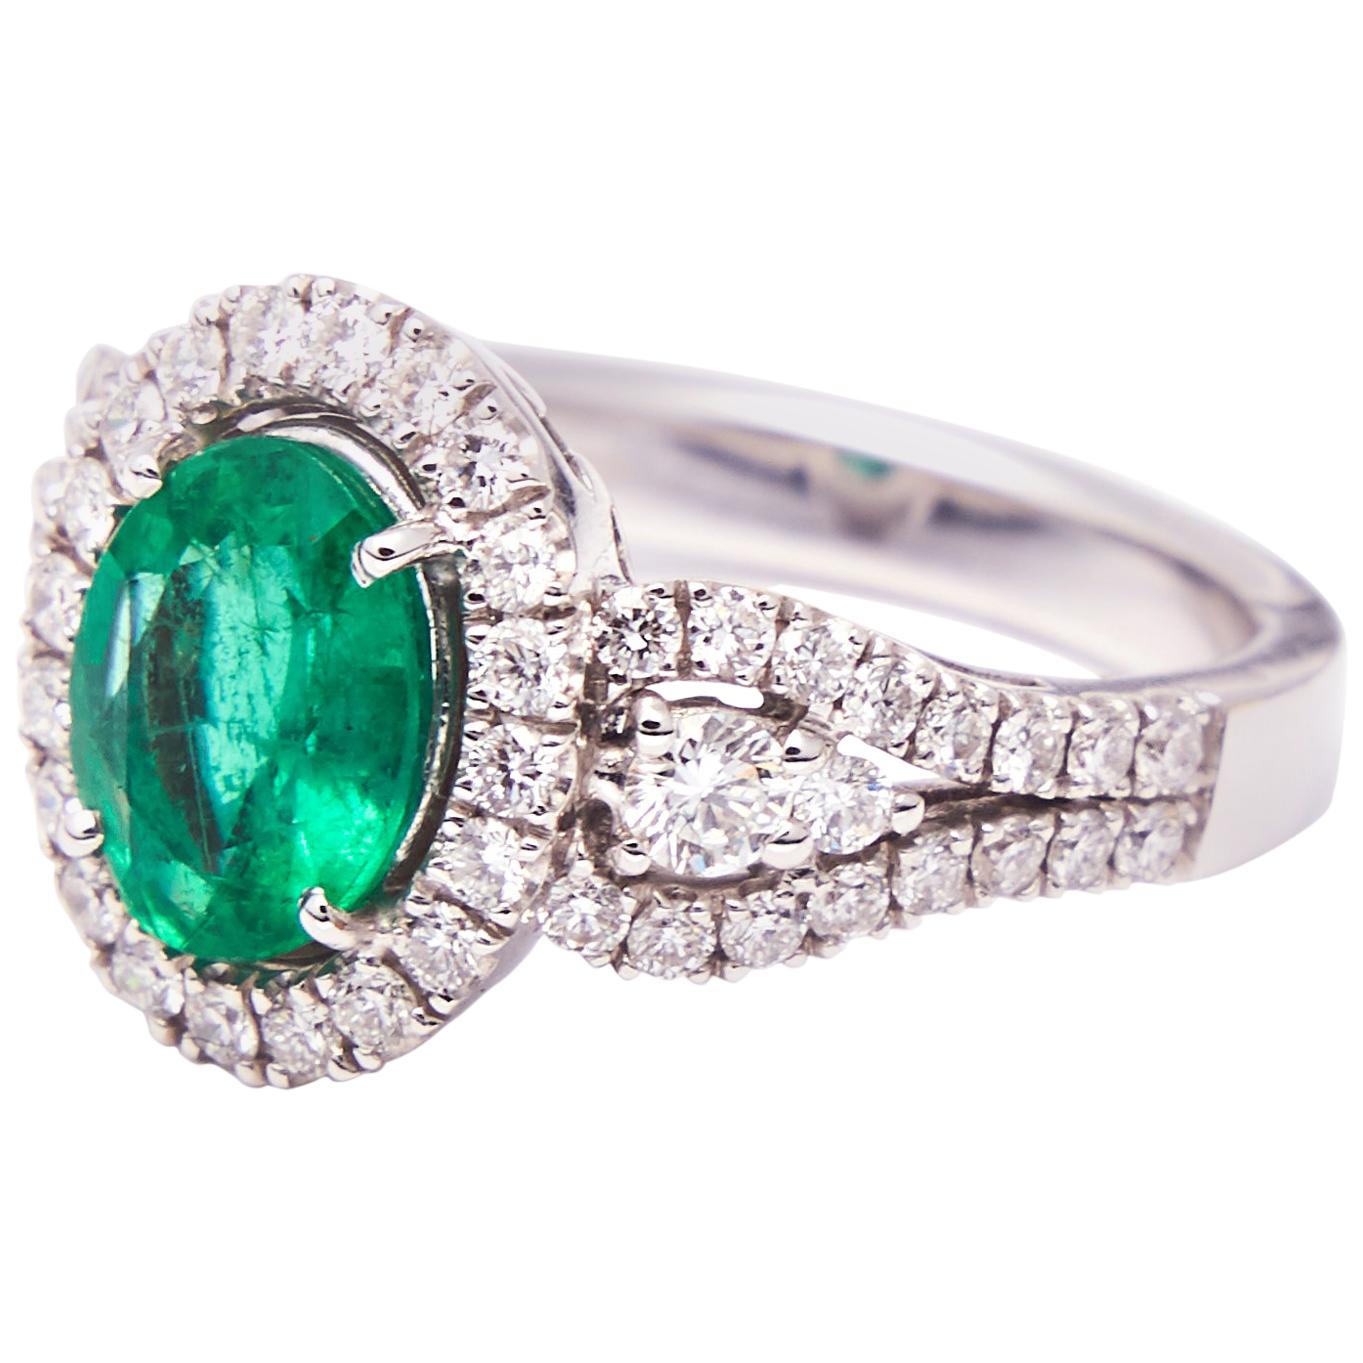 White Gold Engagement Ring with 1.50 Carat Oval Emerald and Diamonds